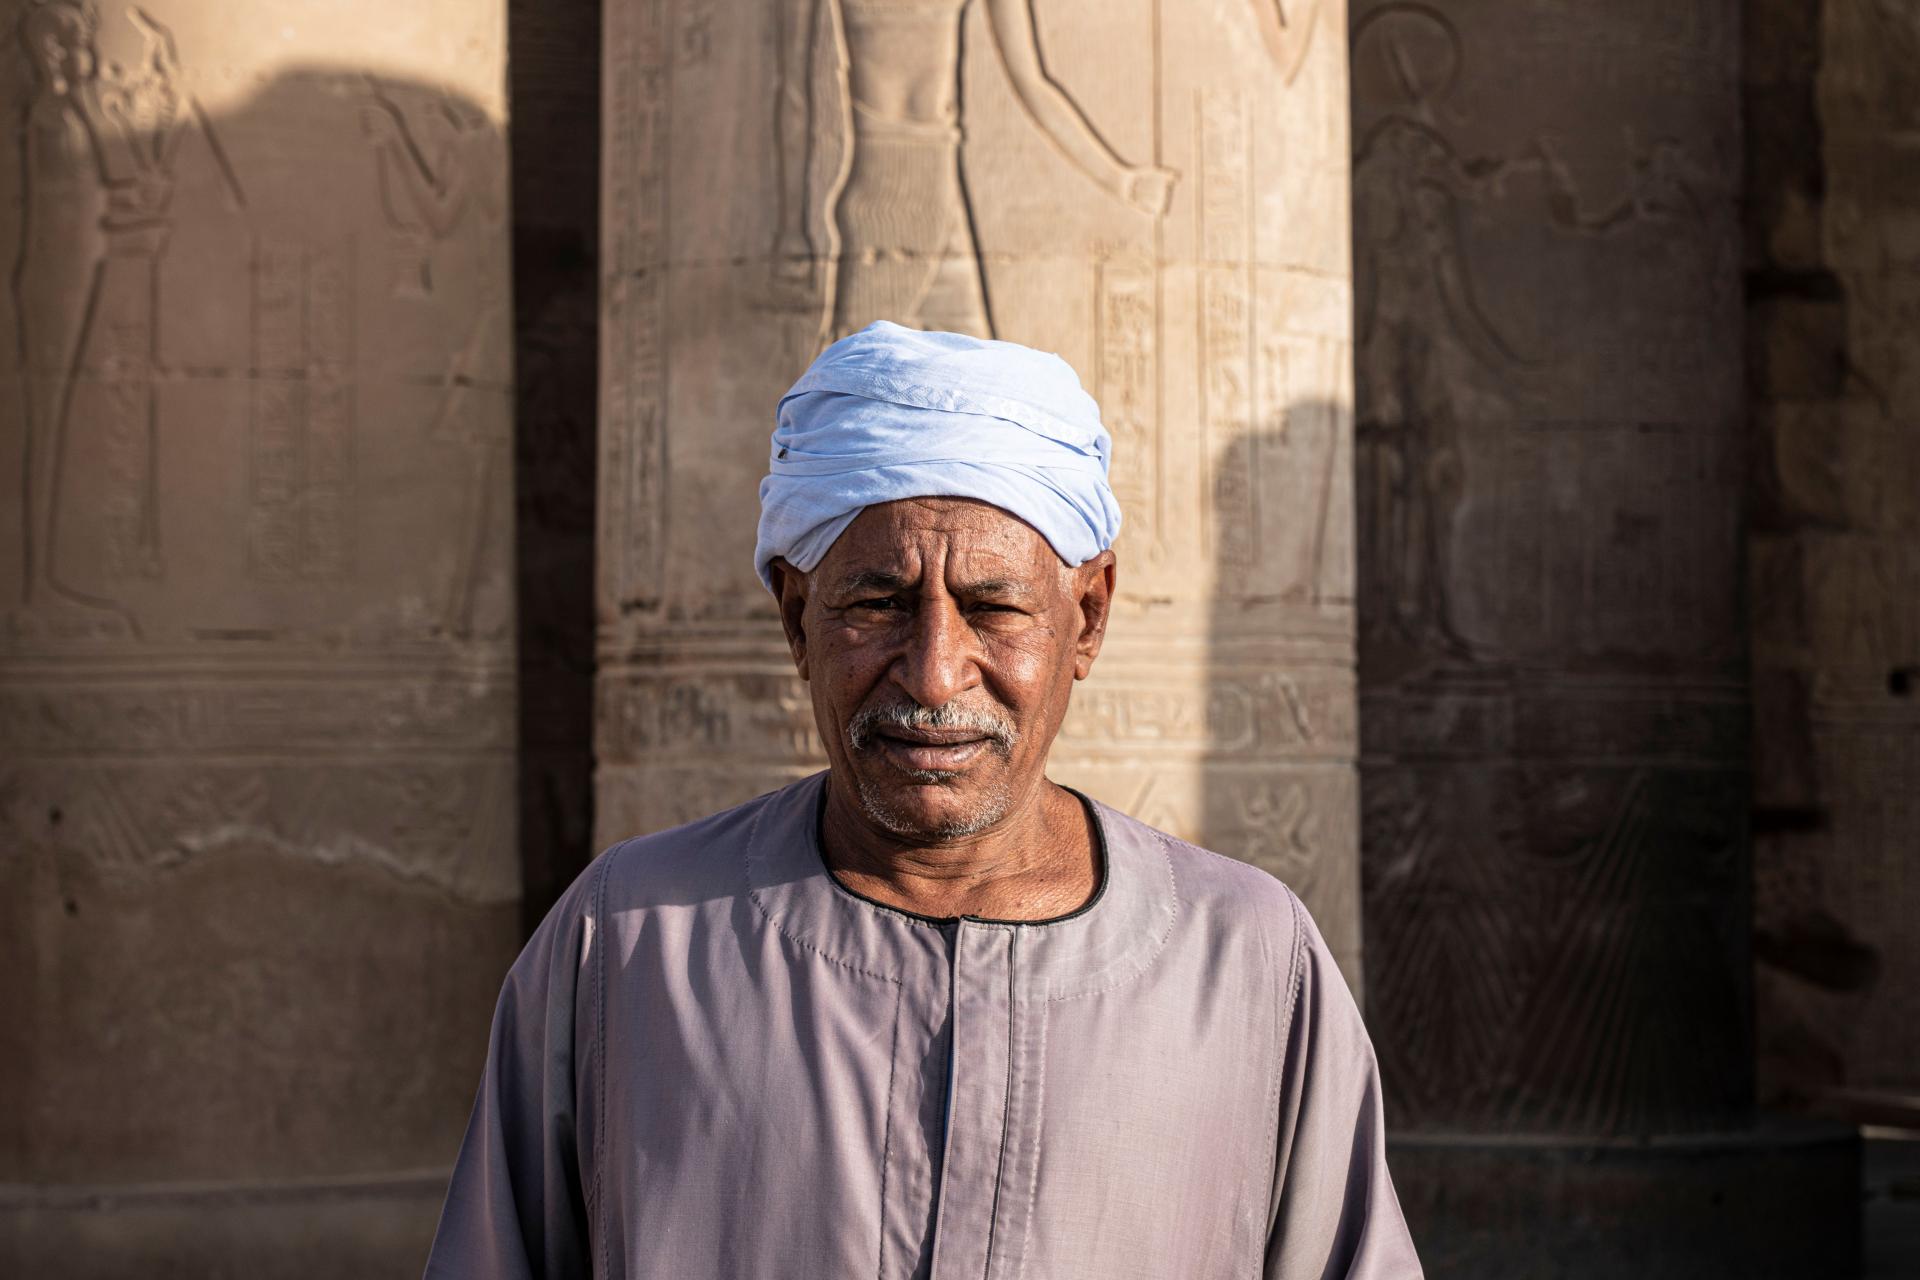 London Photography Awards Winner - EGYPT: AMONG YOURS CORNERS AND THEIR DETAILS